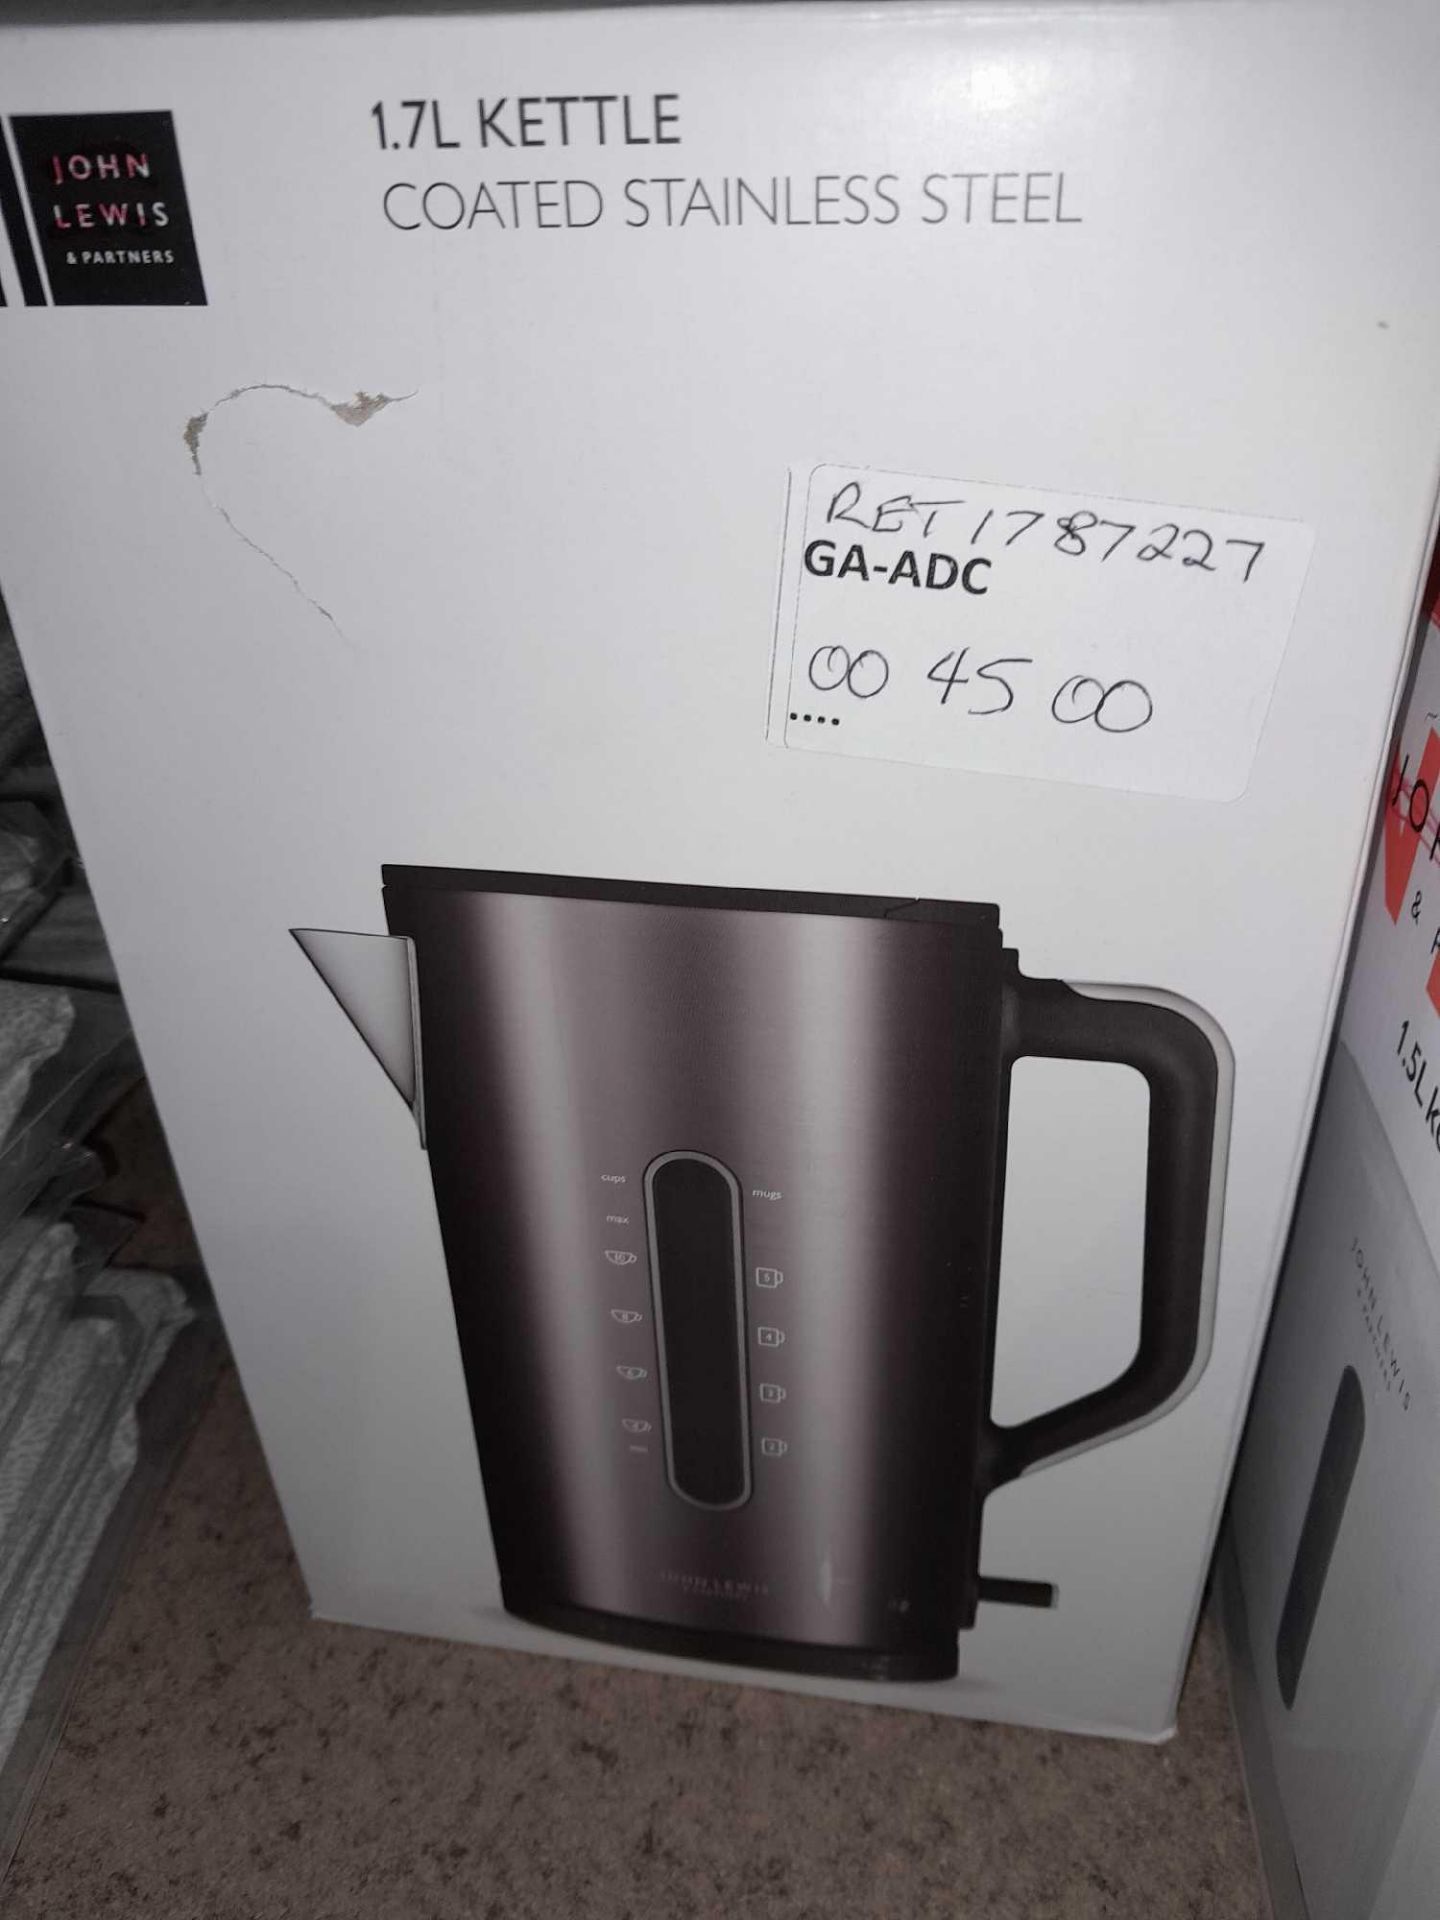 RRP £105 Lot To Contain X3 John Lewis Kettles Including - 1.7L Kettle Coated Stainless Steel, John L - Image 2 of 4